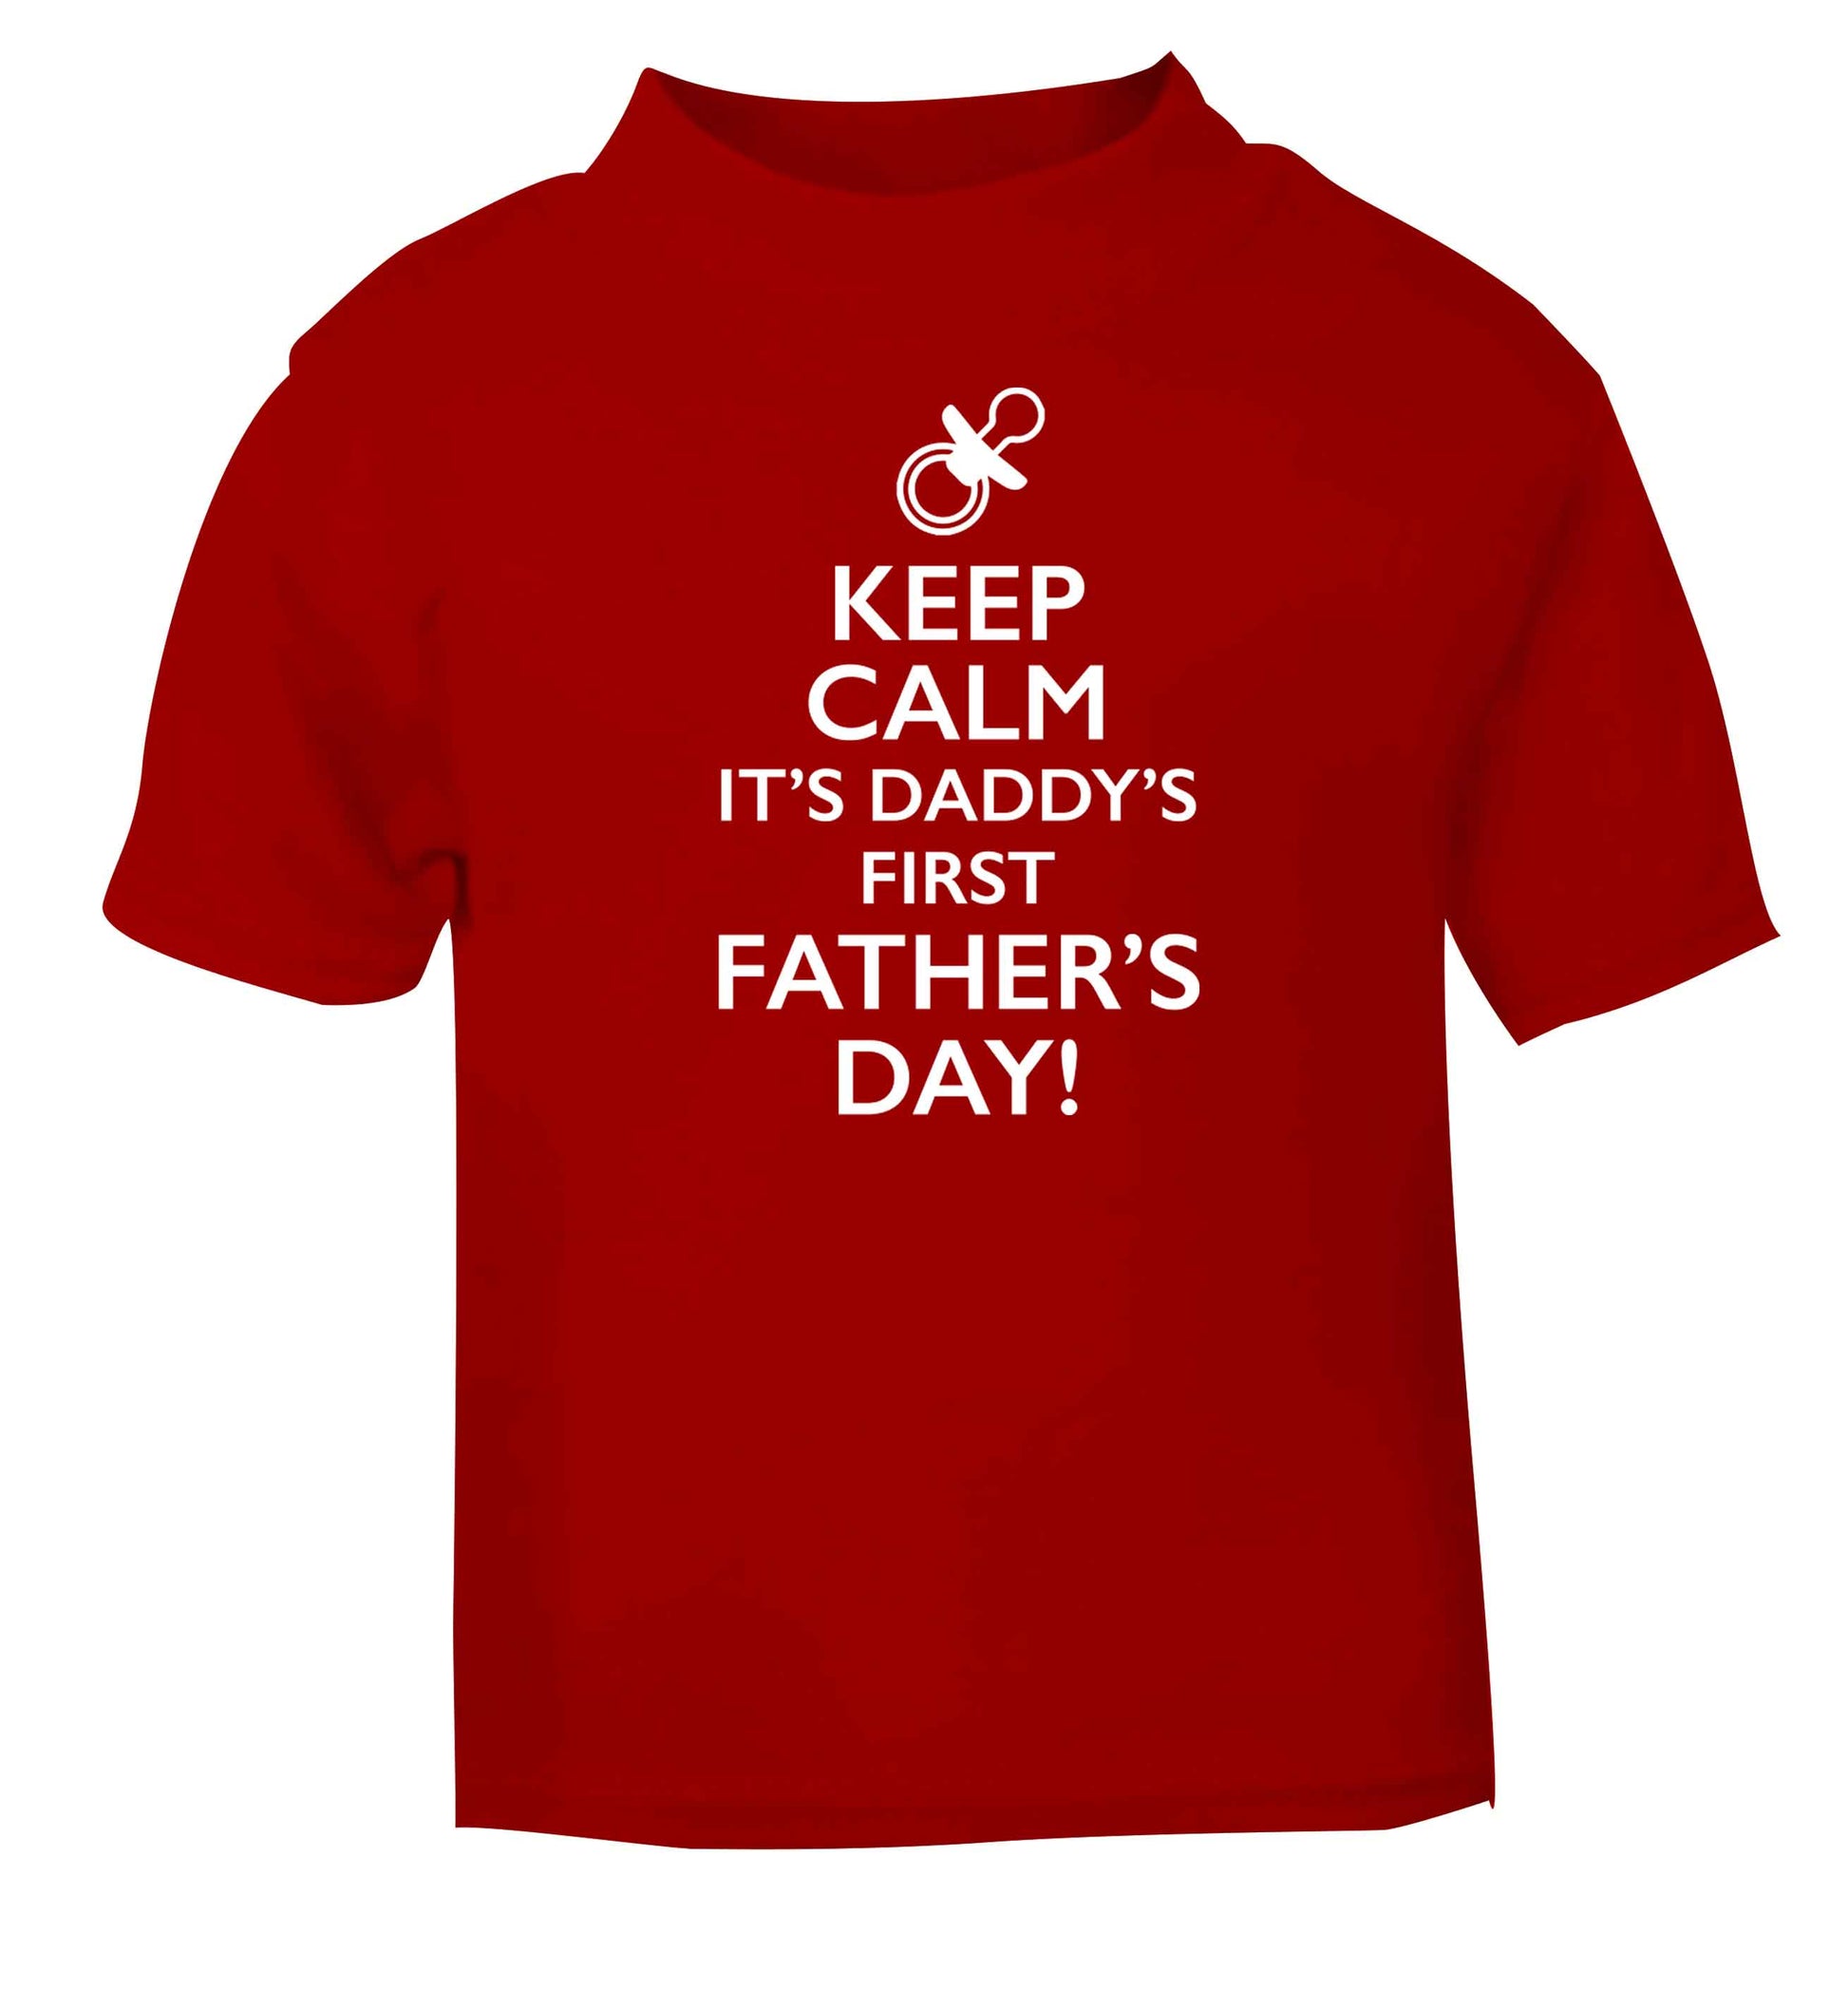 Keep calm it's daddys first father's day red baby toddler Tshirt 2 Years